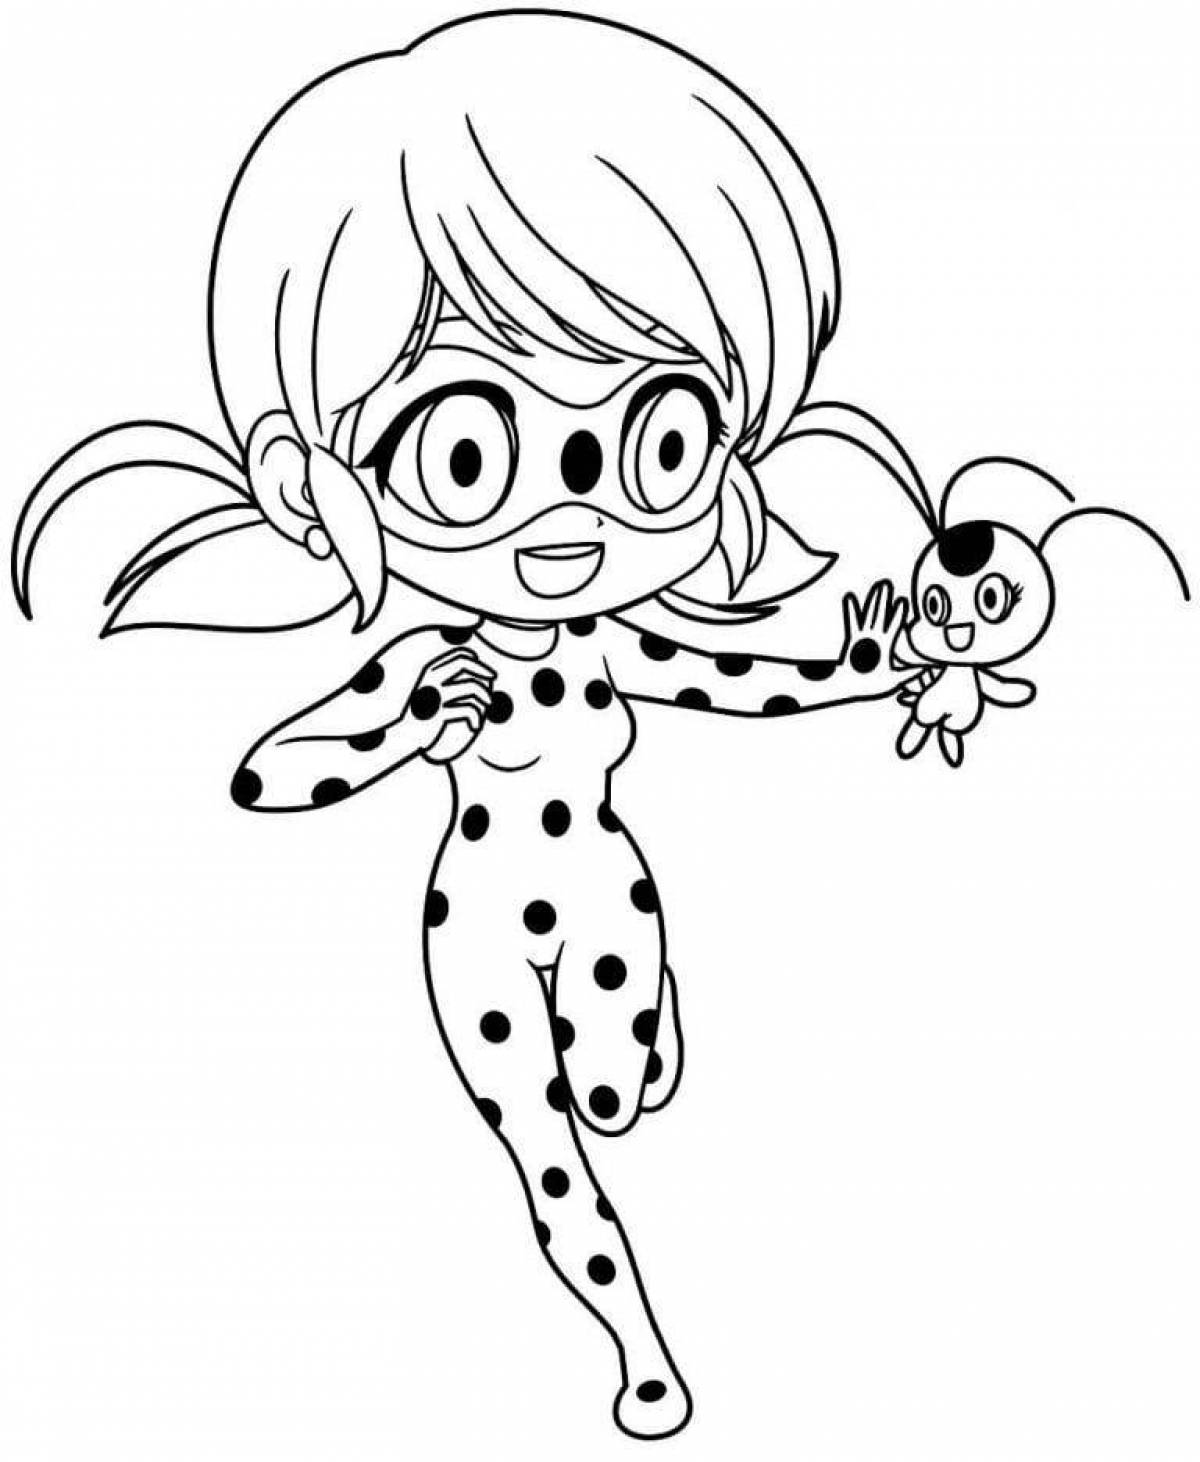 Lady bug coloring page